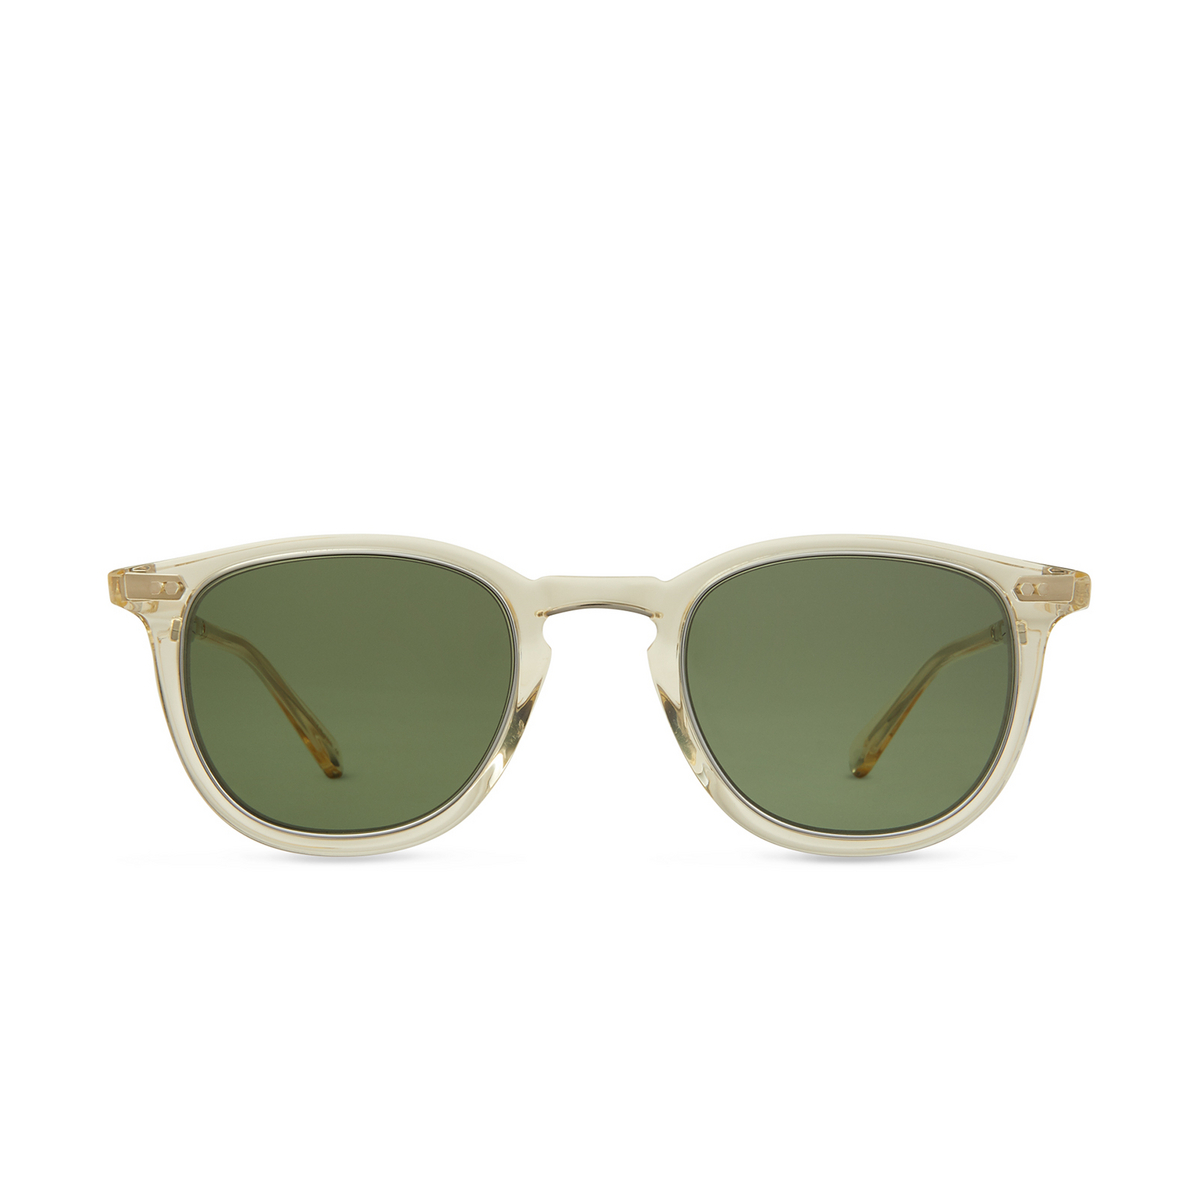 Mr. Leight® Square Sunglasses: Coopers S color Artcry-plt/grn - front view.